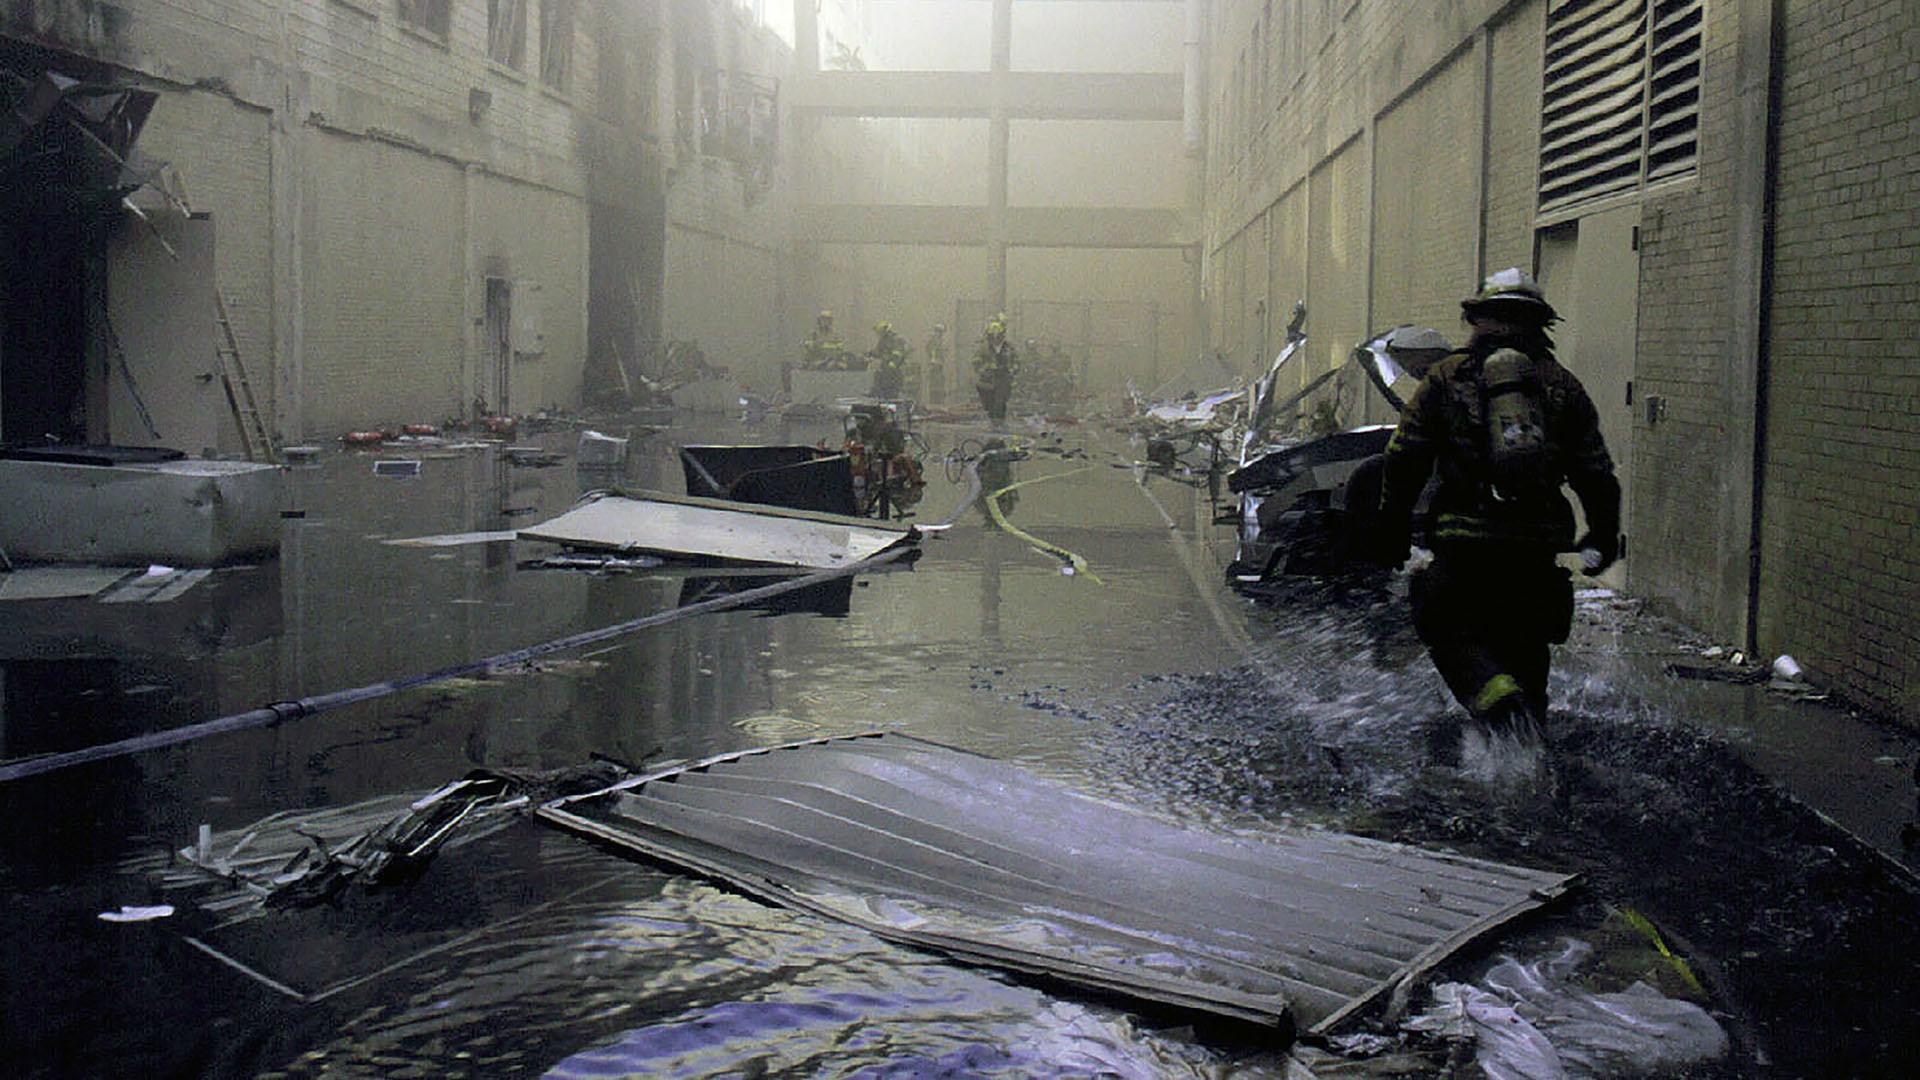 The Pentagon, post-9/11 attack. First responders walk through "AE" Drive.